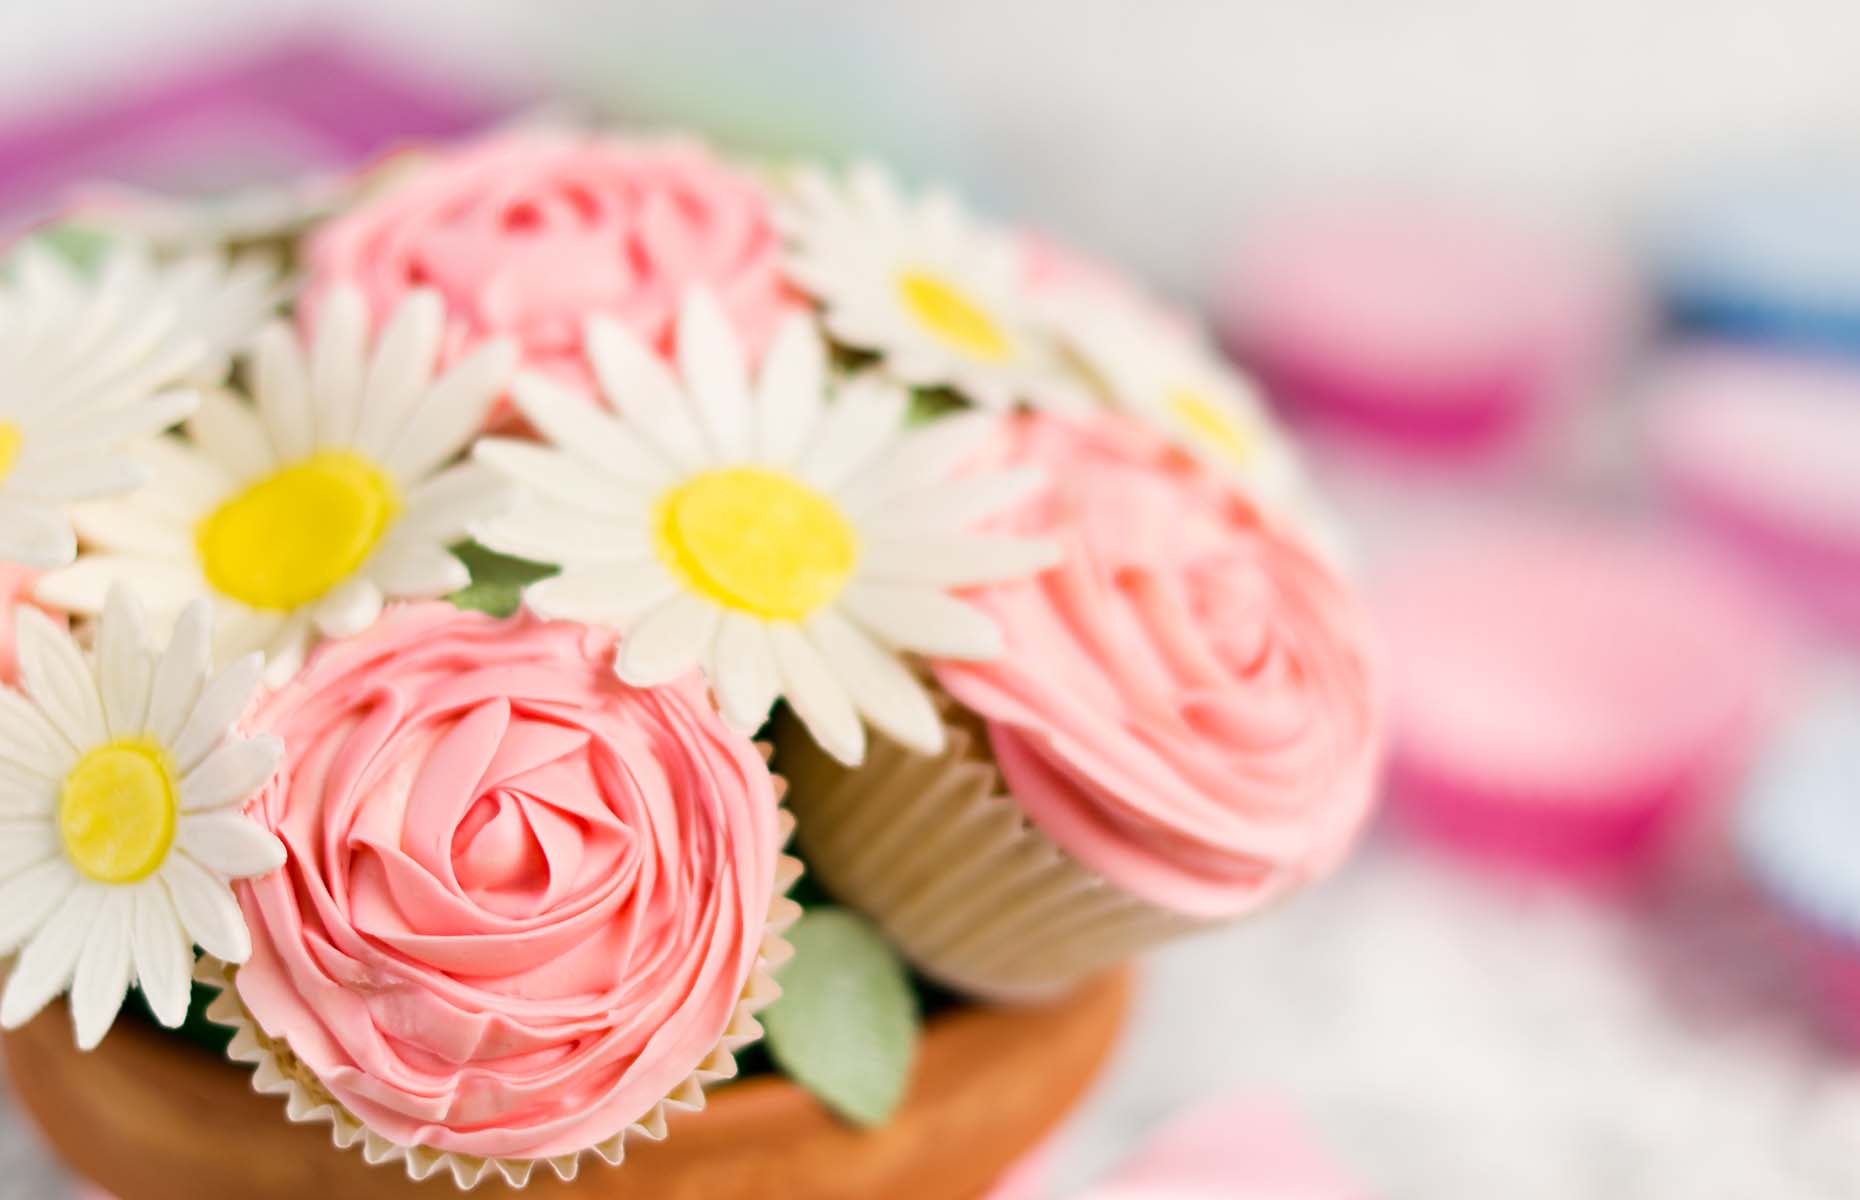 Cupcake bouquet using premade icing flowers (Image: Nathan clifford/Shutterstock)